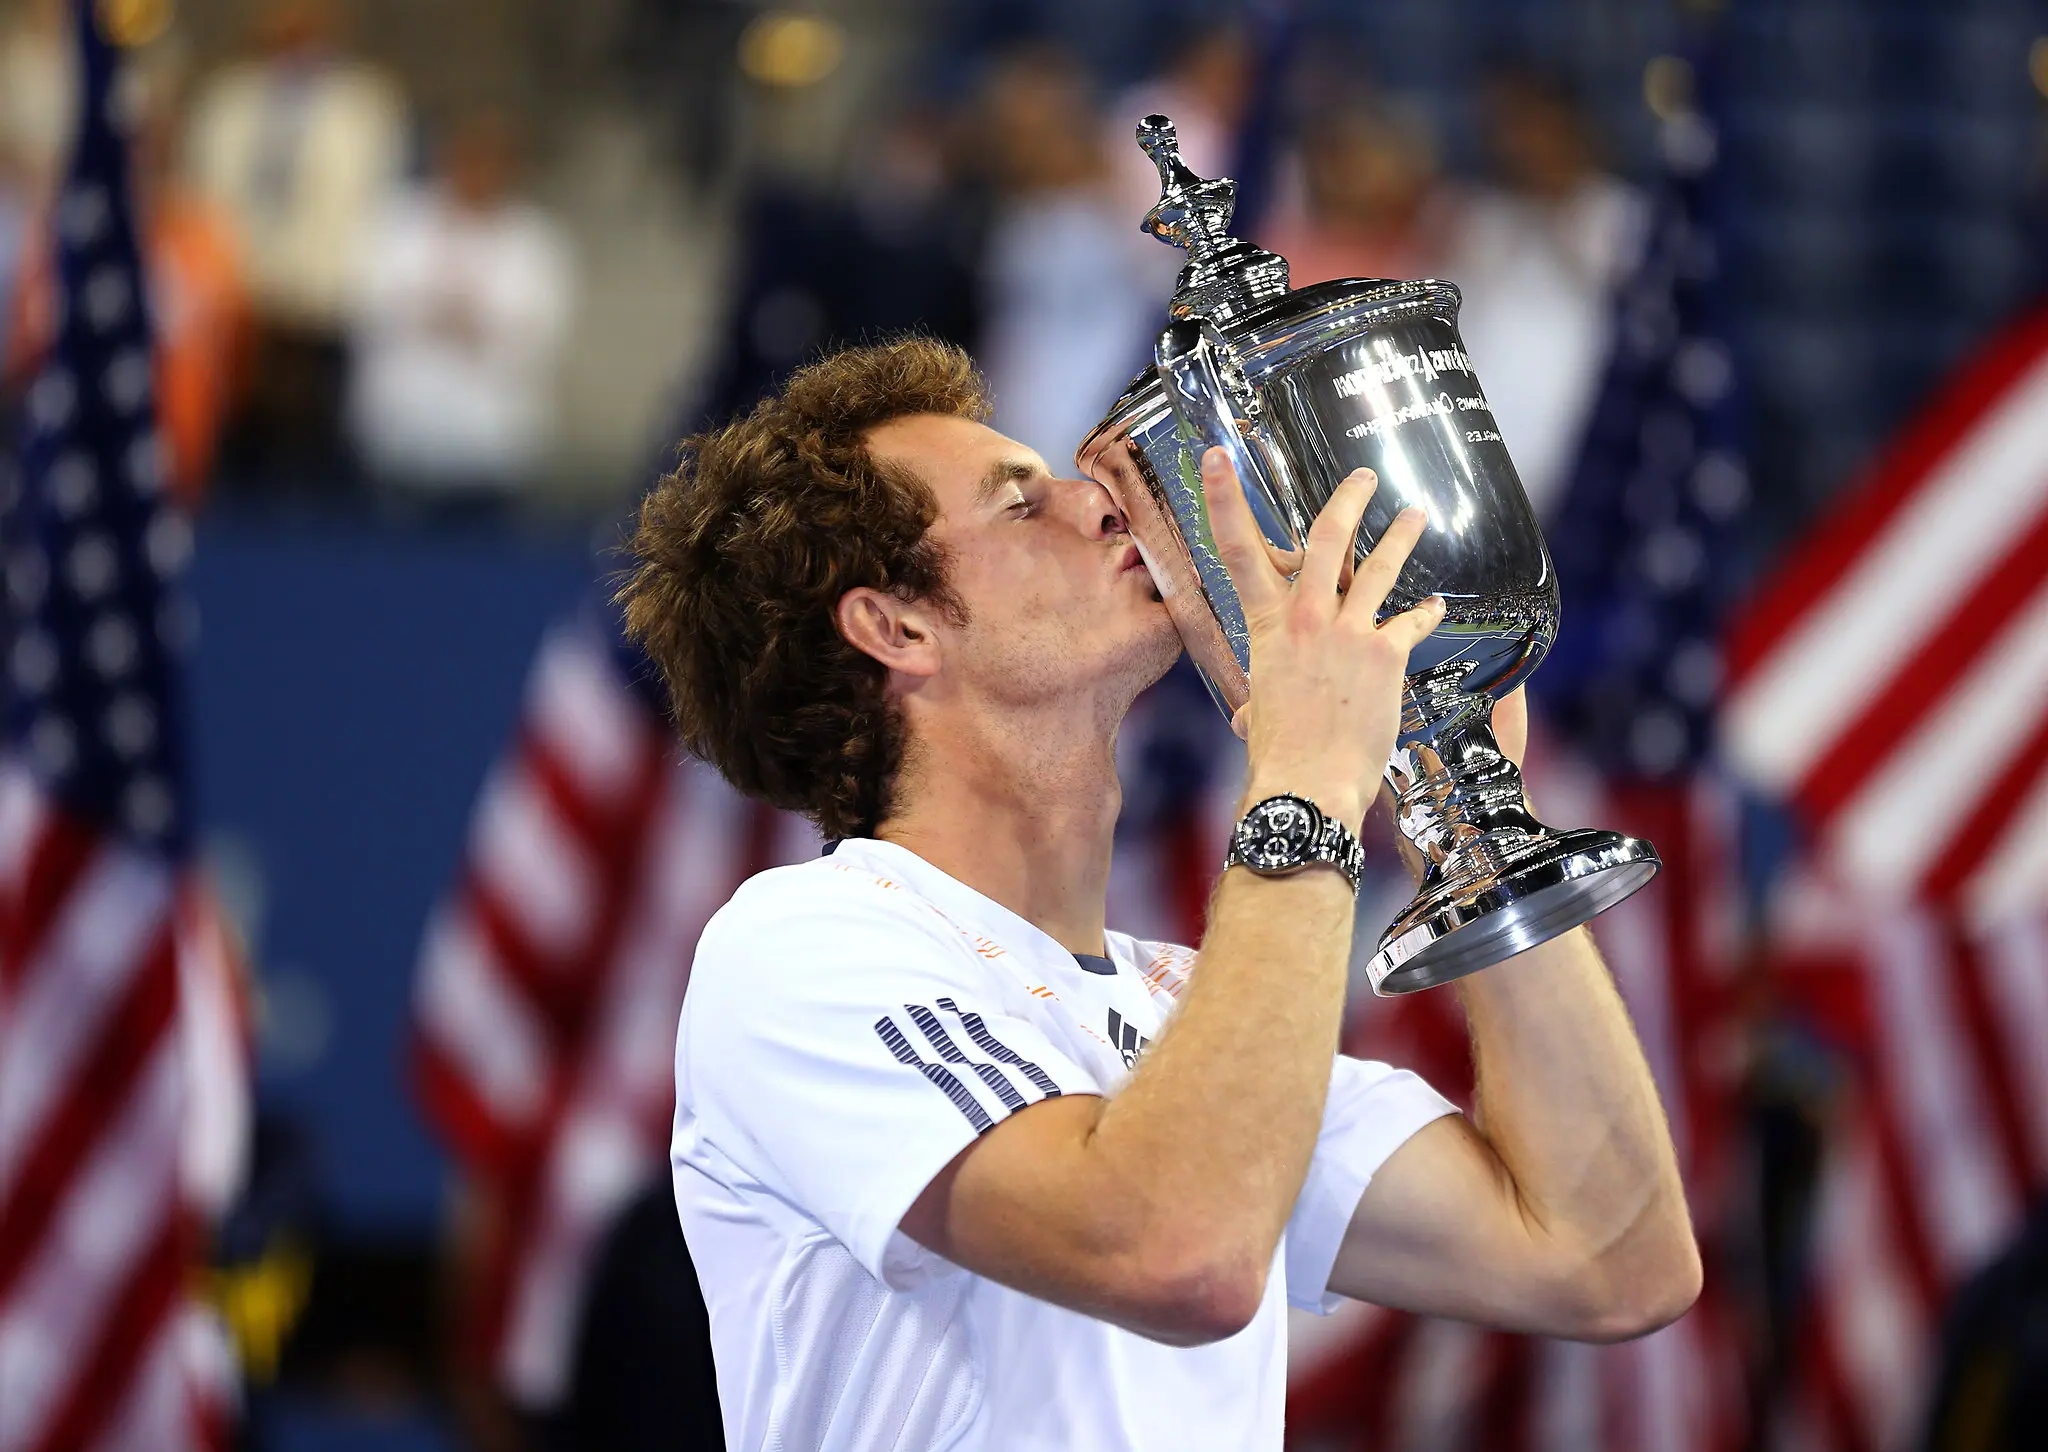 Andy Murray Clinches Historic Victory at 2012 US Open